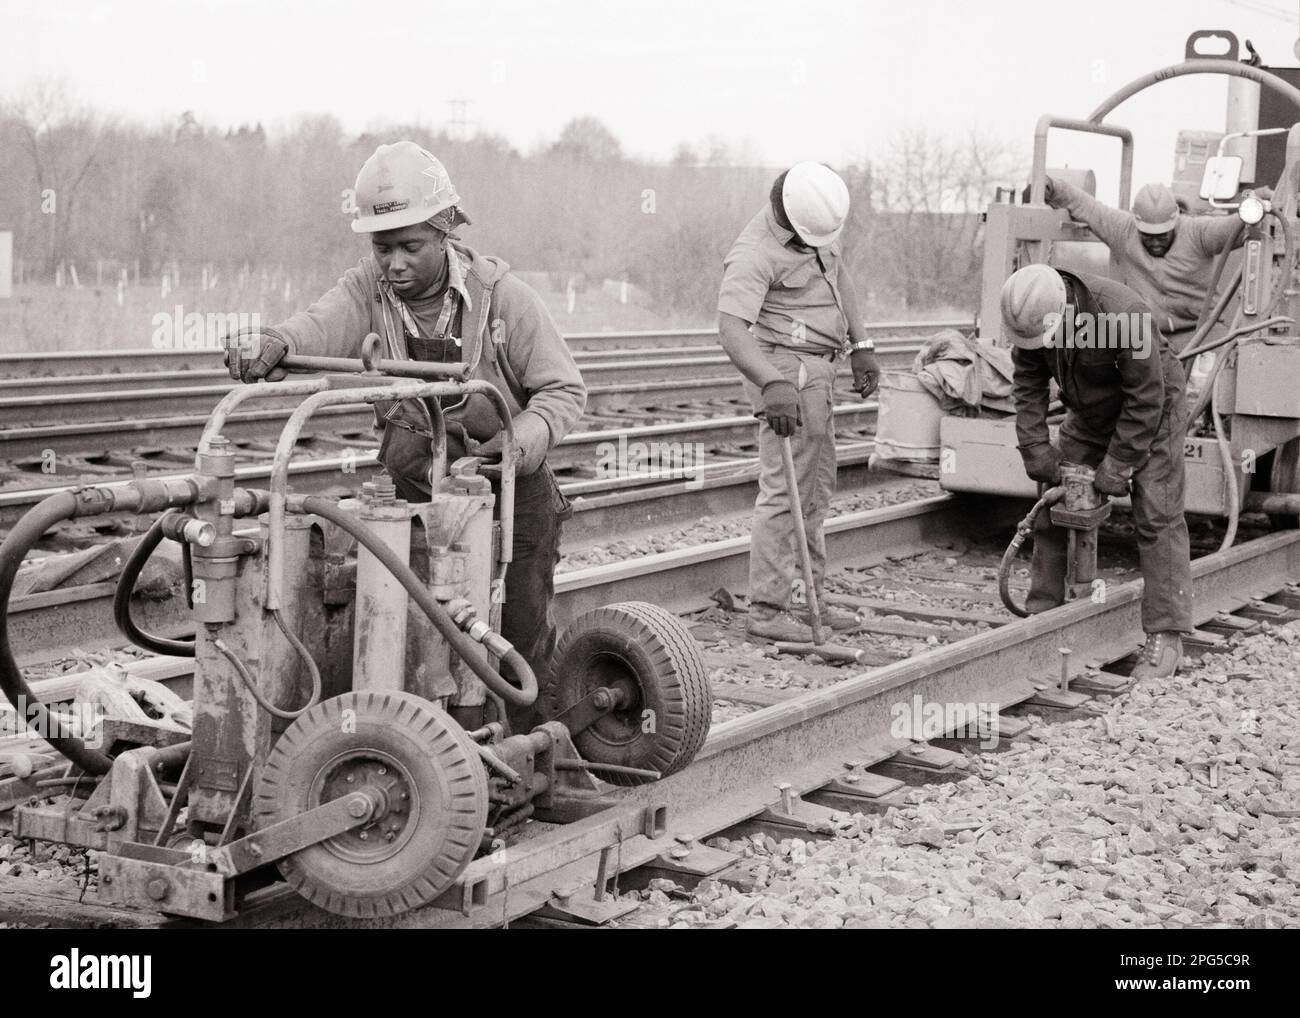 1970s FOUR AFRICAN AMERICAN RAILROAD WORKERS BOTH MALE AND FEMALE DOING RAIL REPAIR ON AMTRAK TRAIN TRACKS - i6921 HAR001 HARS CONFIDENCE TRANSPORTATION B&W TRACKS RAIL SKILL OCCUPATION SKILLS AFRICAN-AMERICANS AFRICAN-AMERICAN AND CAREERS BLACK ETHNICITY LABOR PRIDE OPPORTUNITY EMPLOYMENT OCCUPATIONS MAINTENANCE INFRASTRUCTURE RAILROADS EMPLOYEE COOPERATION GENDER MID-ADULT MID-ADULT MAN PRECISION YOUNG ADULT MAN YOUNG ADULT WOMAN BLACK AND WHITE HAR001 LABORING OLD FASHIONED AFRICAN AMERICANS Stock Photo